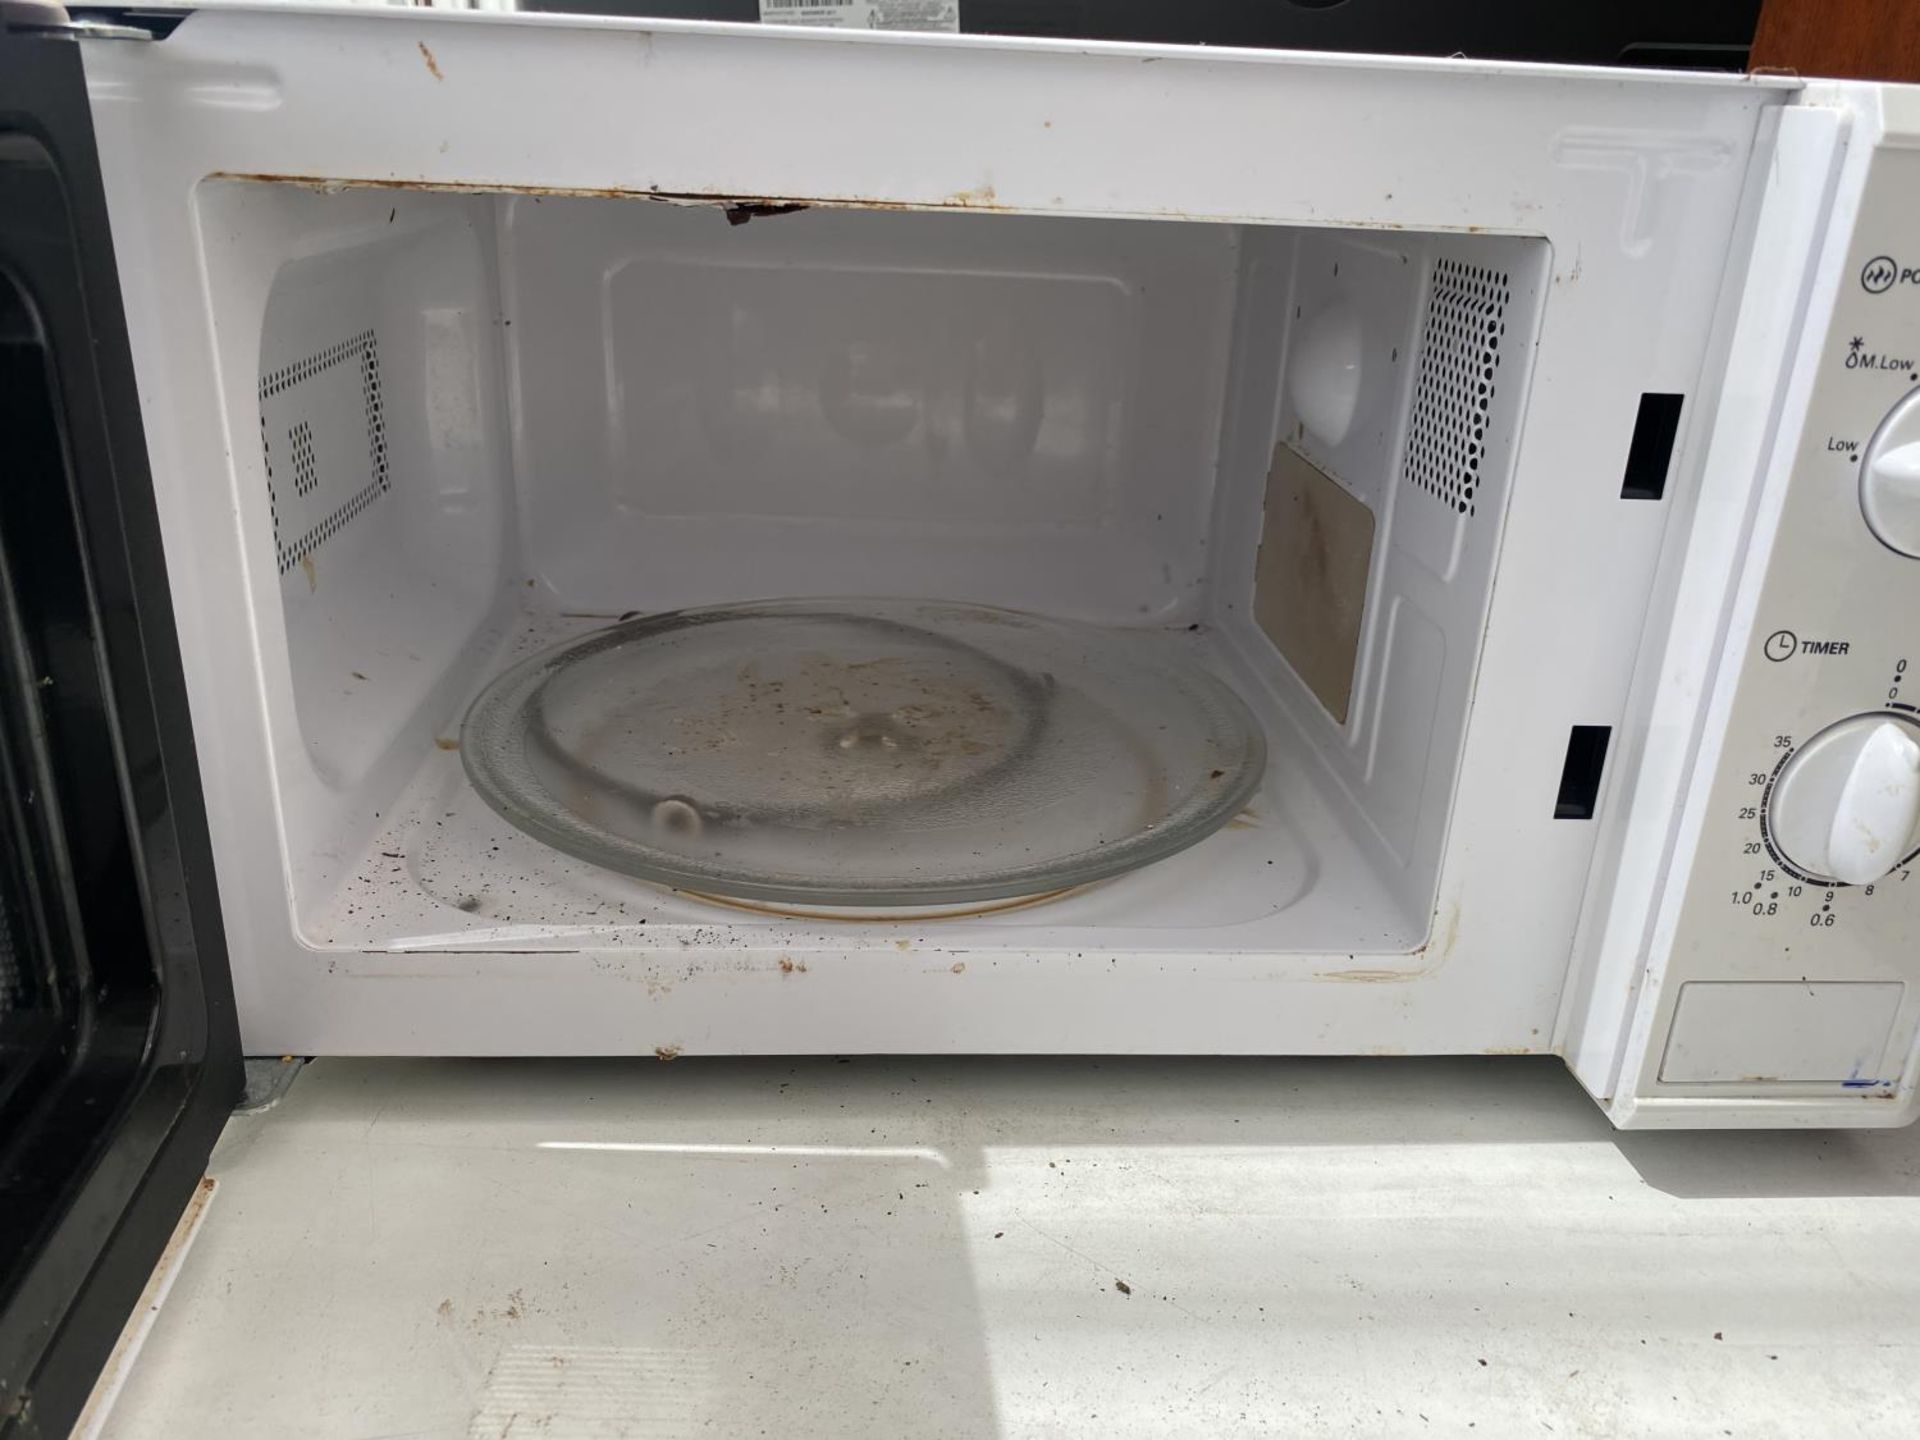 A WHITE SAINSBURYS MICROWAVE OVEN - Image 2 of 2